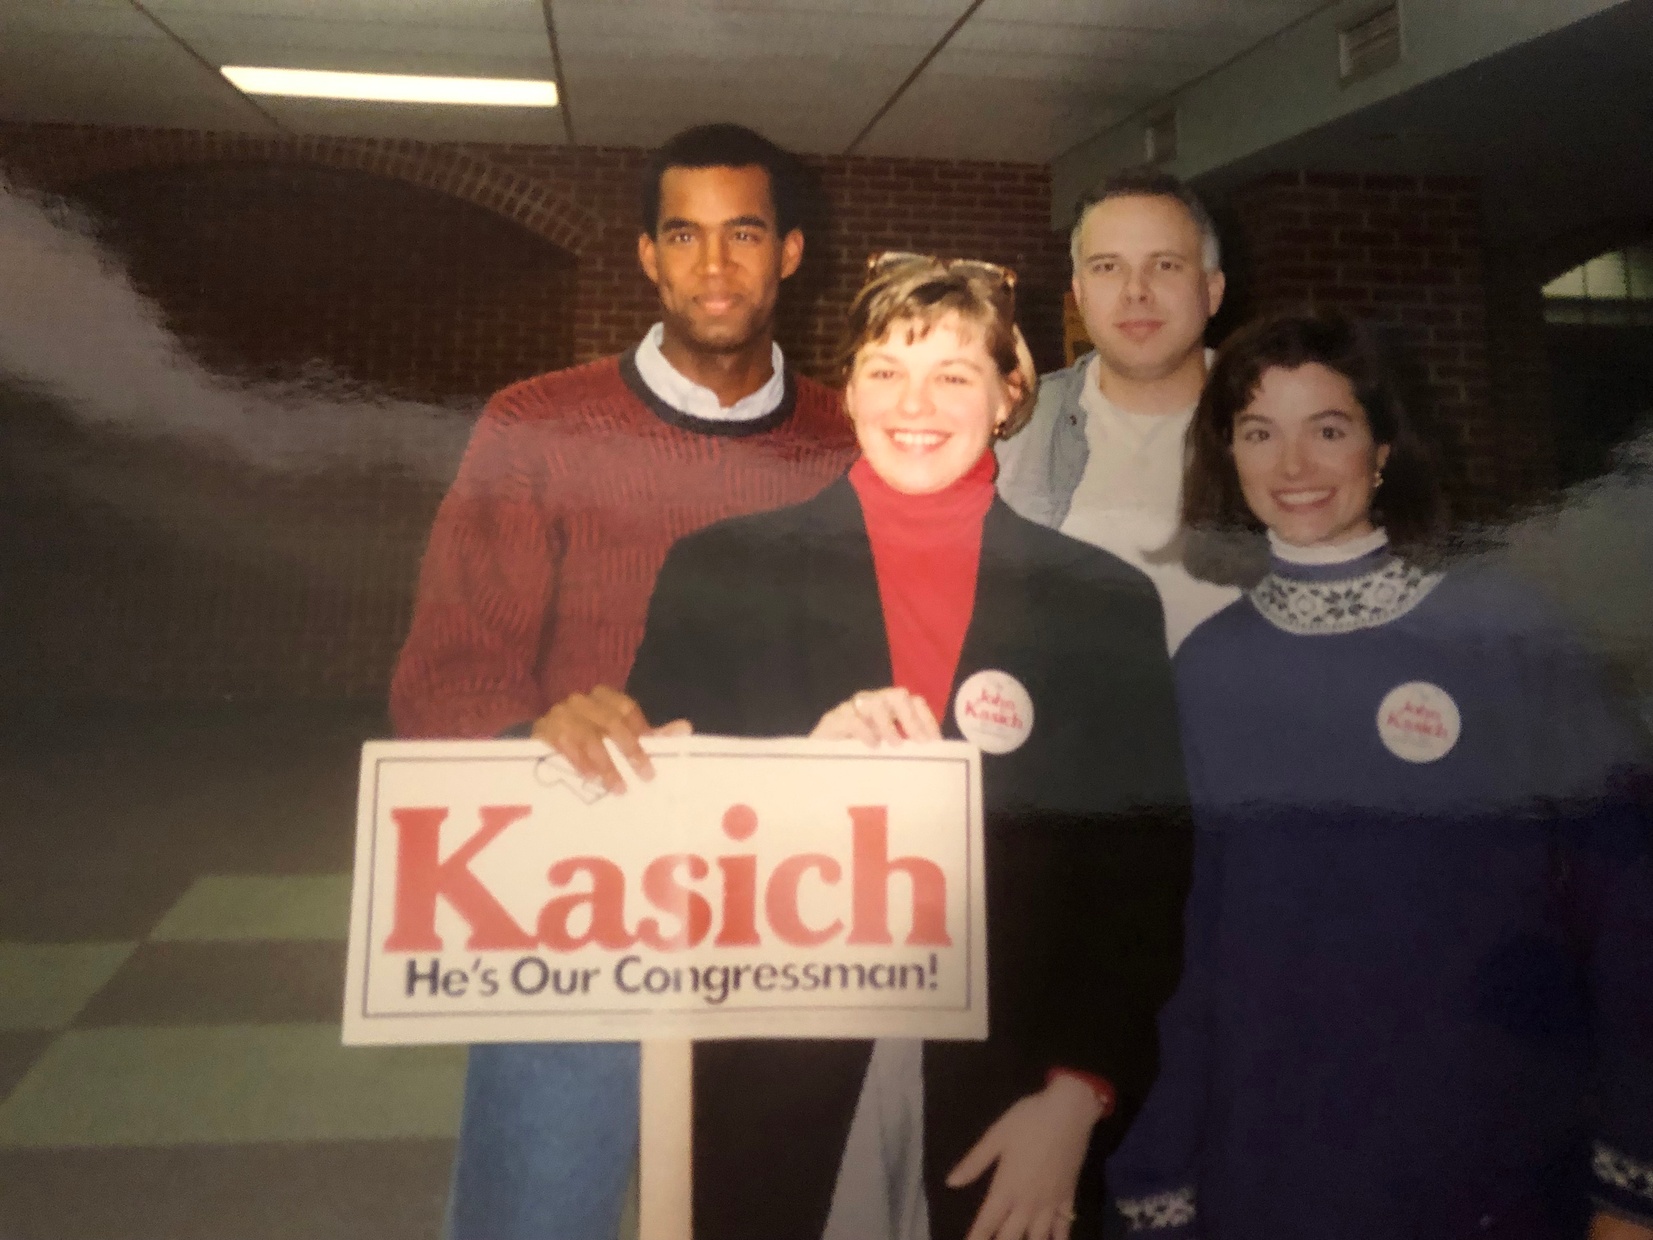 Four adults standing together inside a brick interior are smiling at the camera. The two women in front are wearing pins and holding a picket sign that says, “Kasich He’s Our Congressman!”